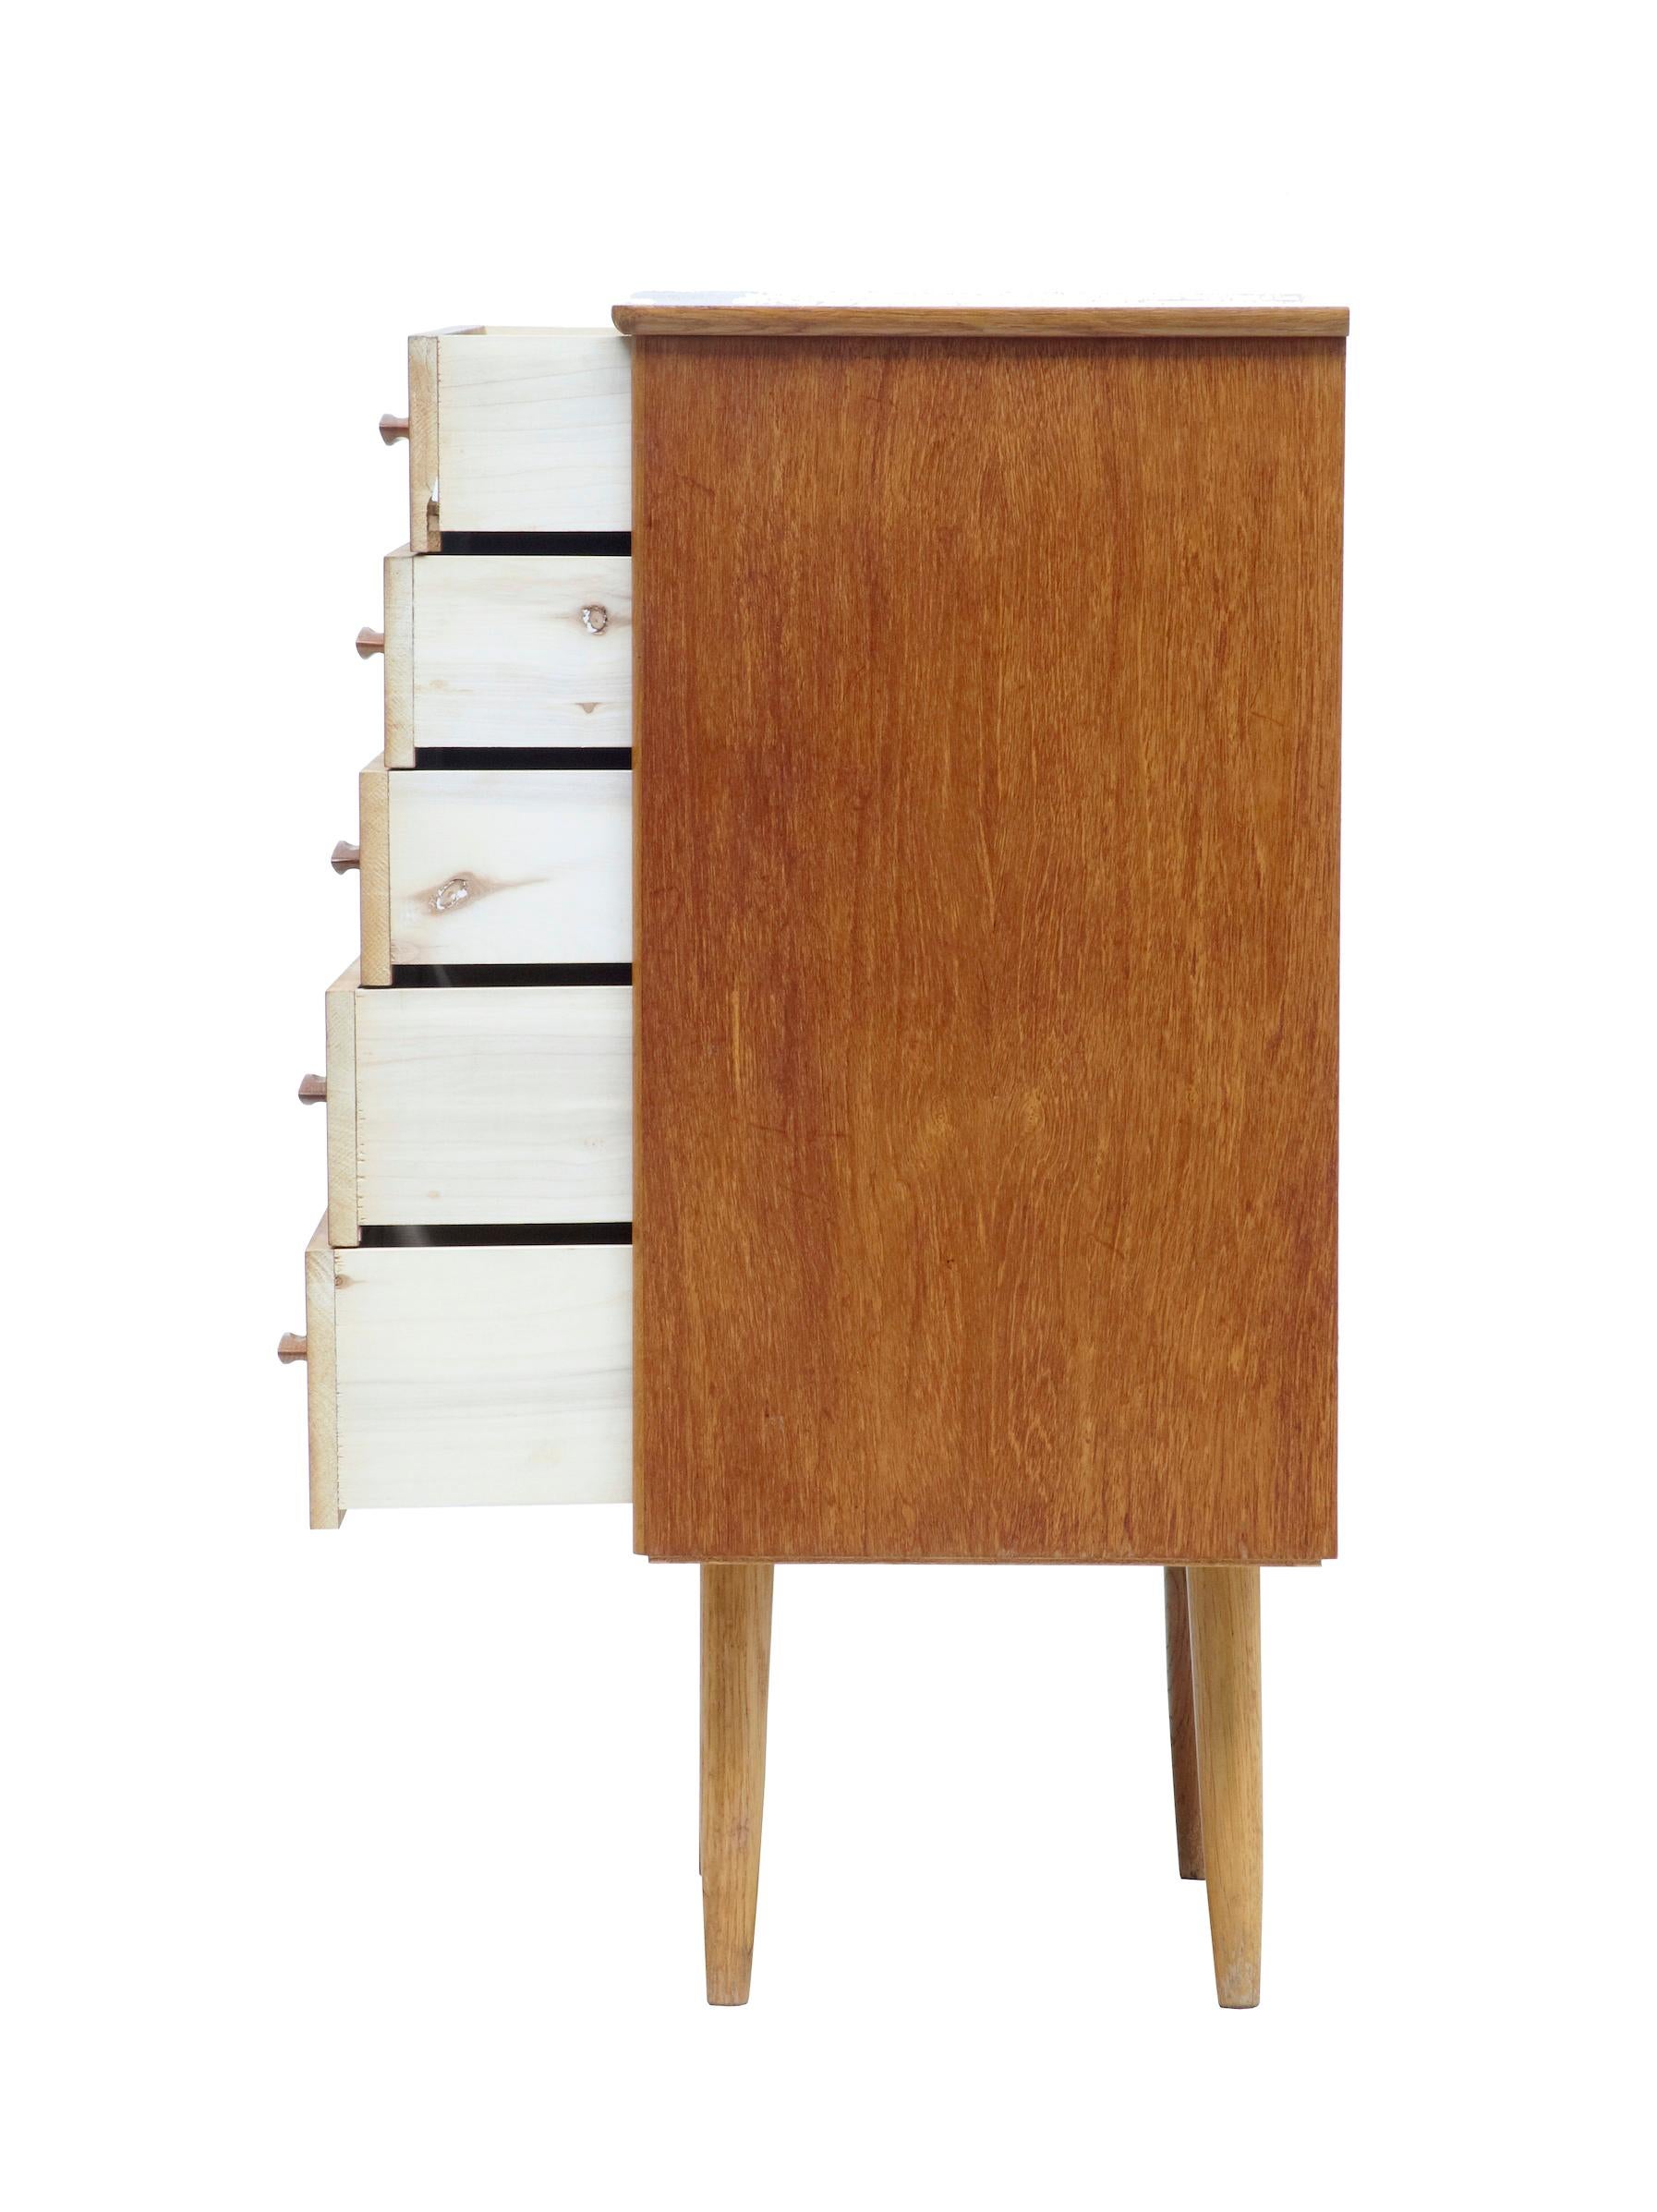 Small Danish mid-20th century teak chest of drawers, circa 1960.

Small 5-drawer chest of drawers. Fitted with contrasting light oak handles.

Light veneer damage to 4th drawer (photographed) surface marks to top surface, which could be improved.